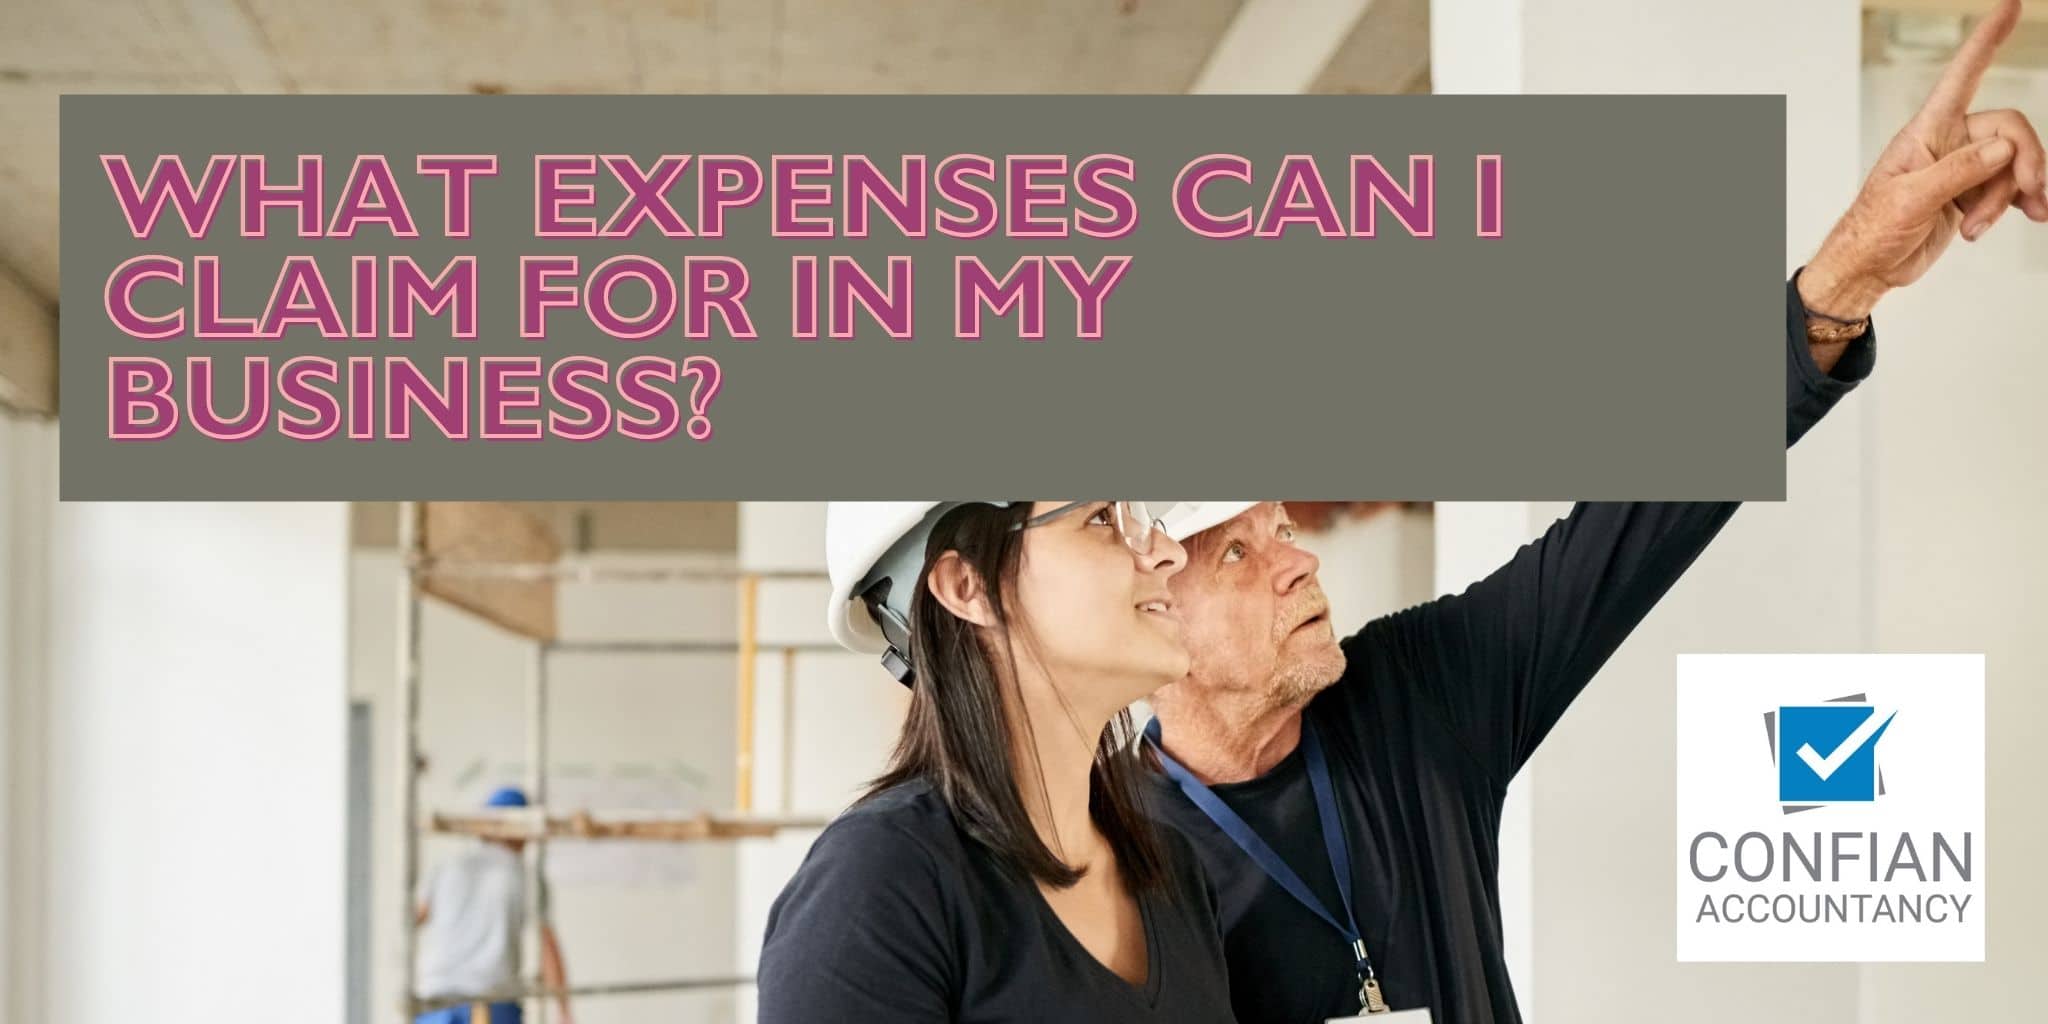 What expenses can I claim for in my business